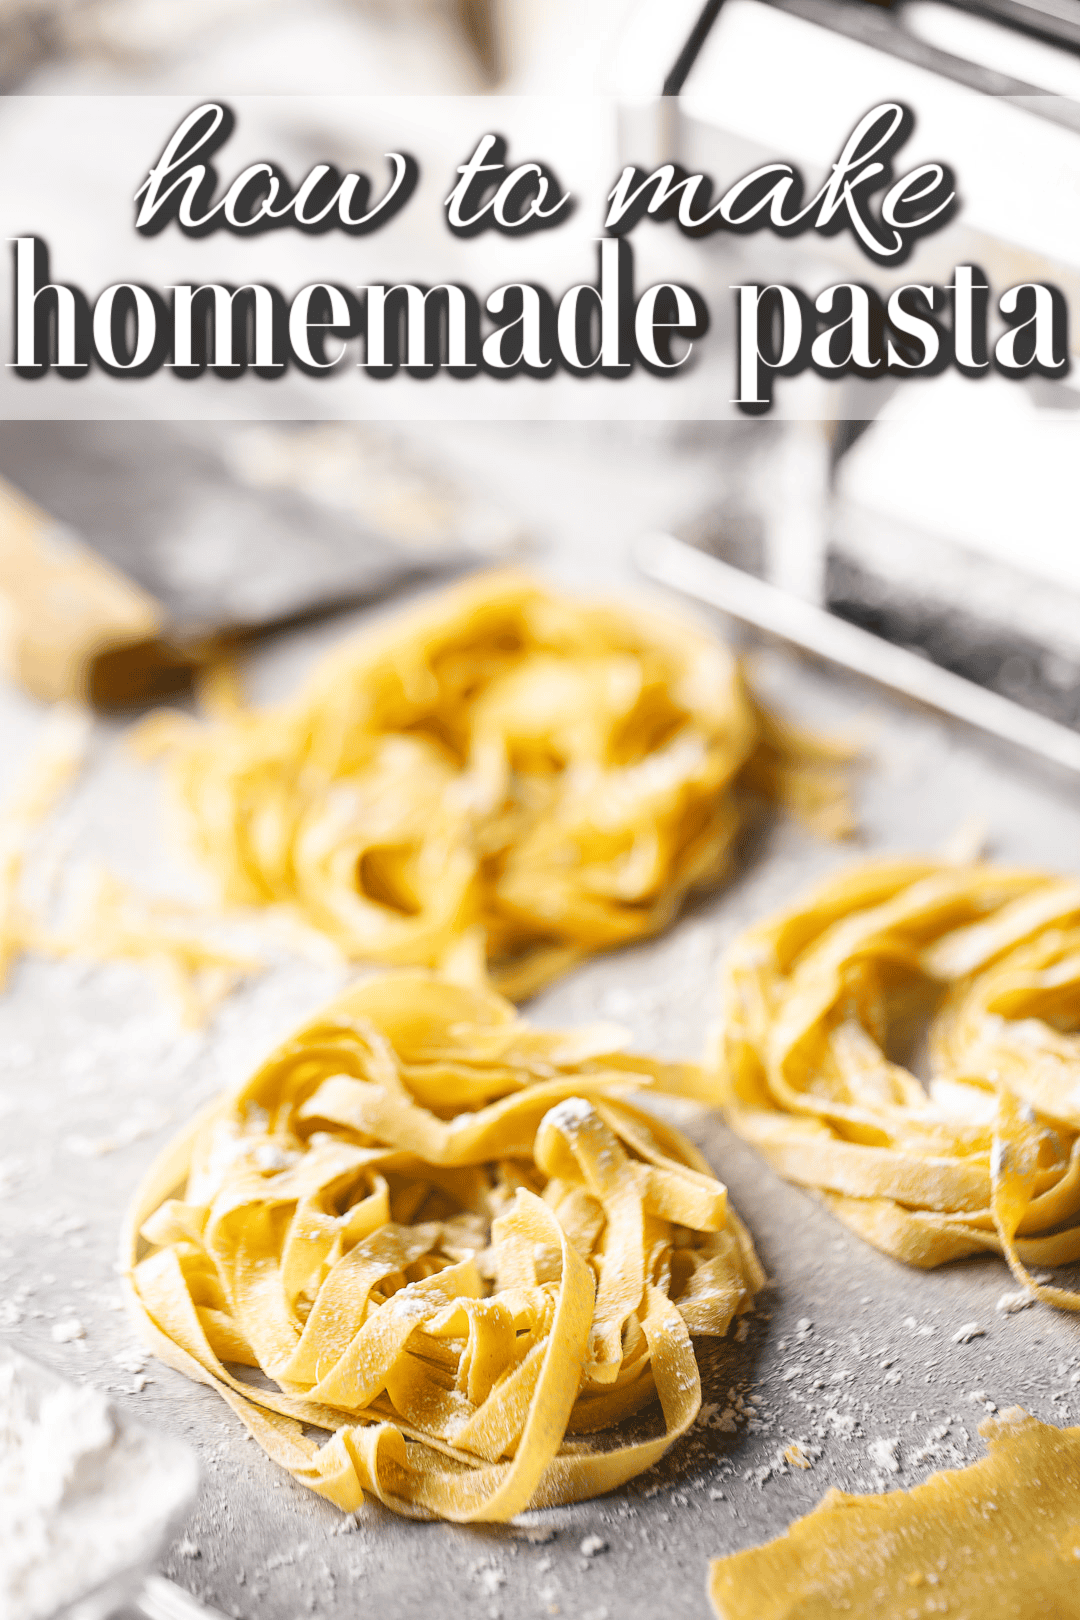 Homemade pasta dusted with flour and presented on a pale gray surface.